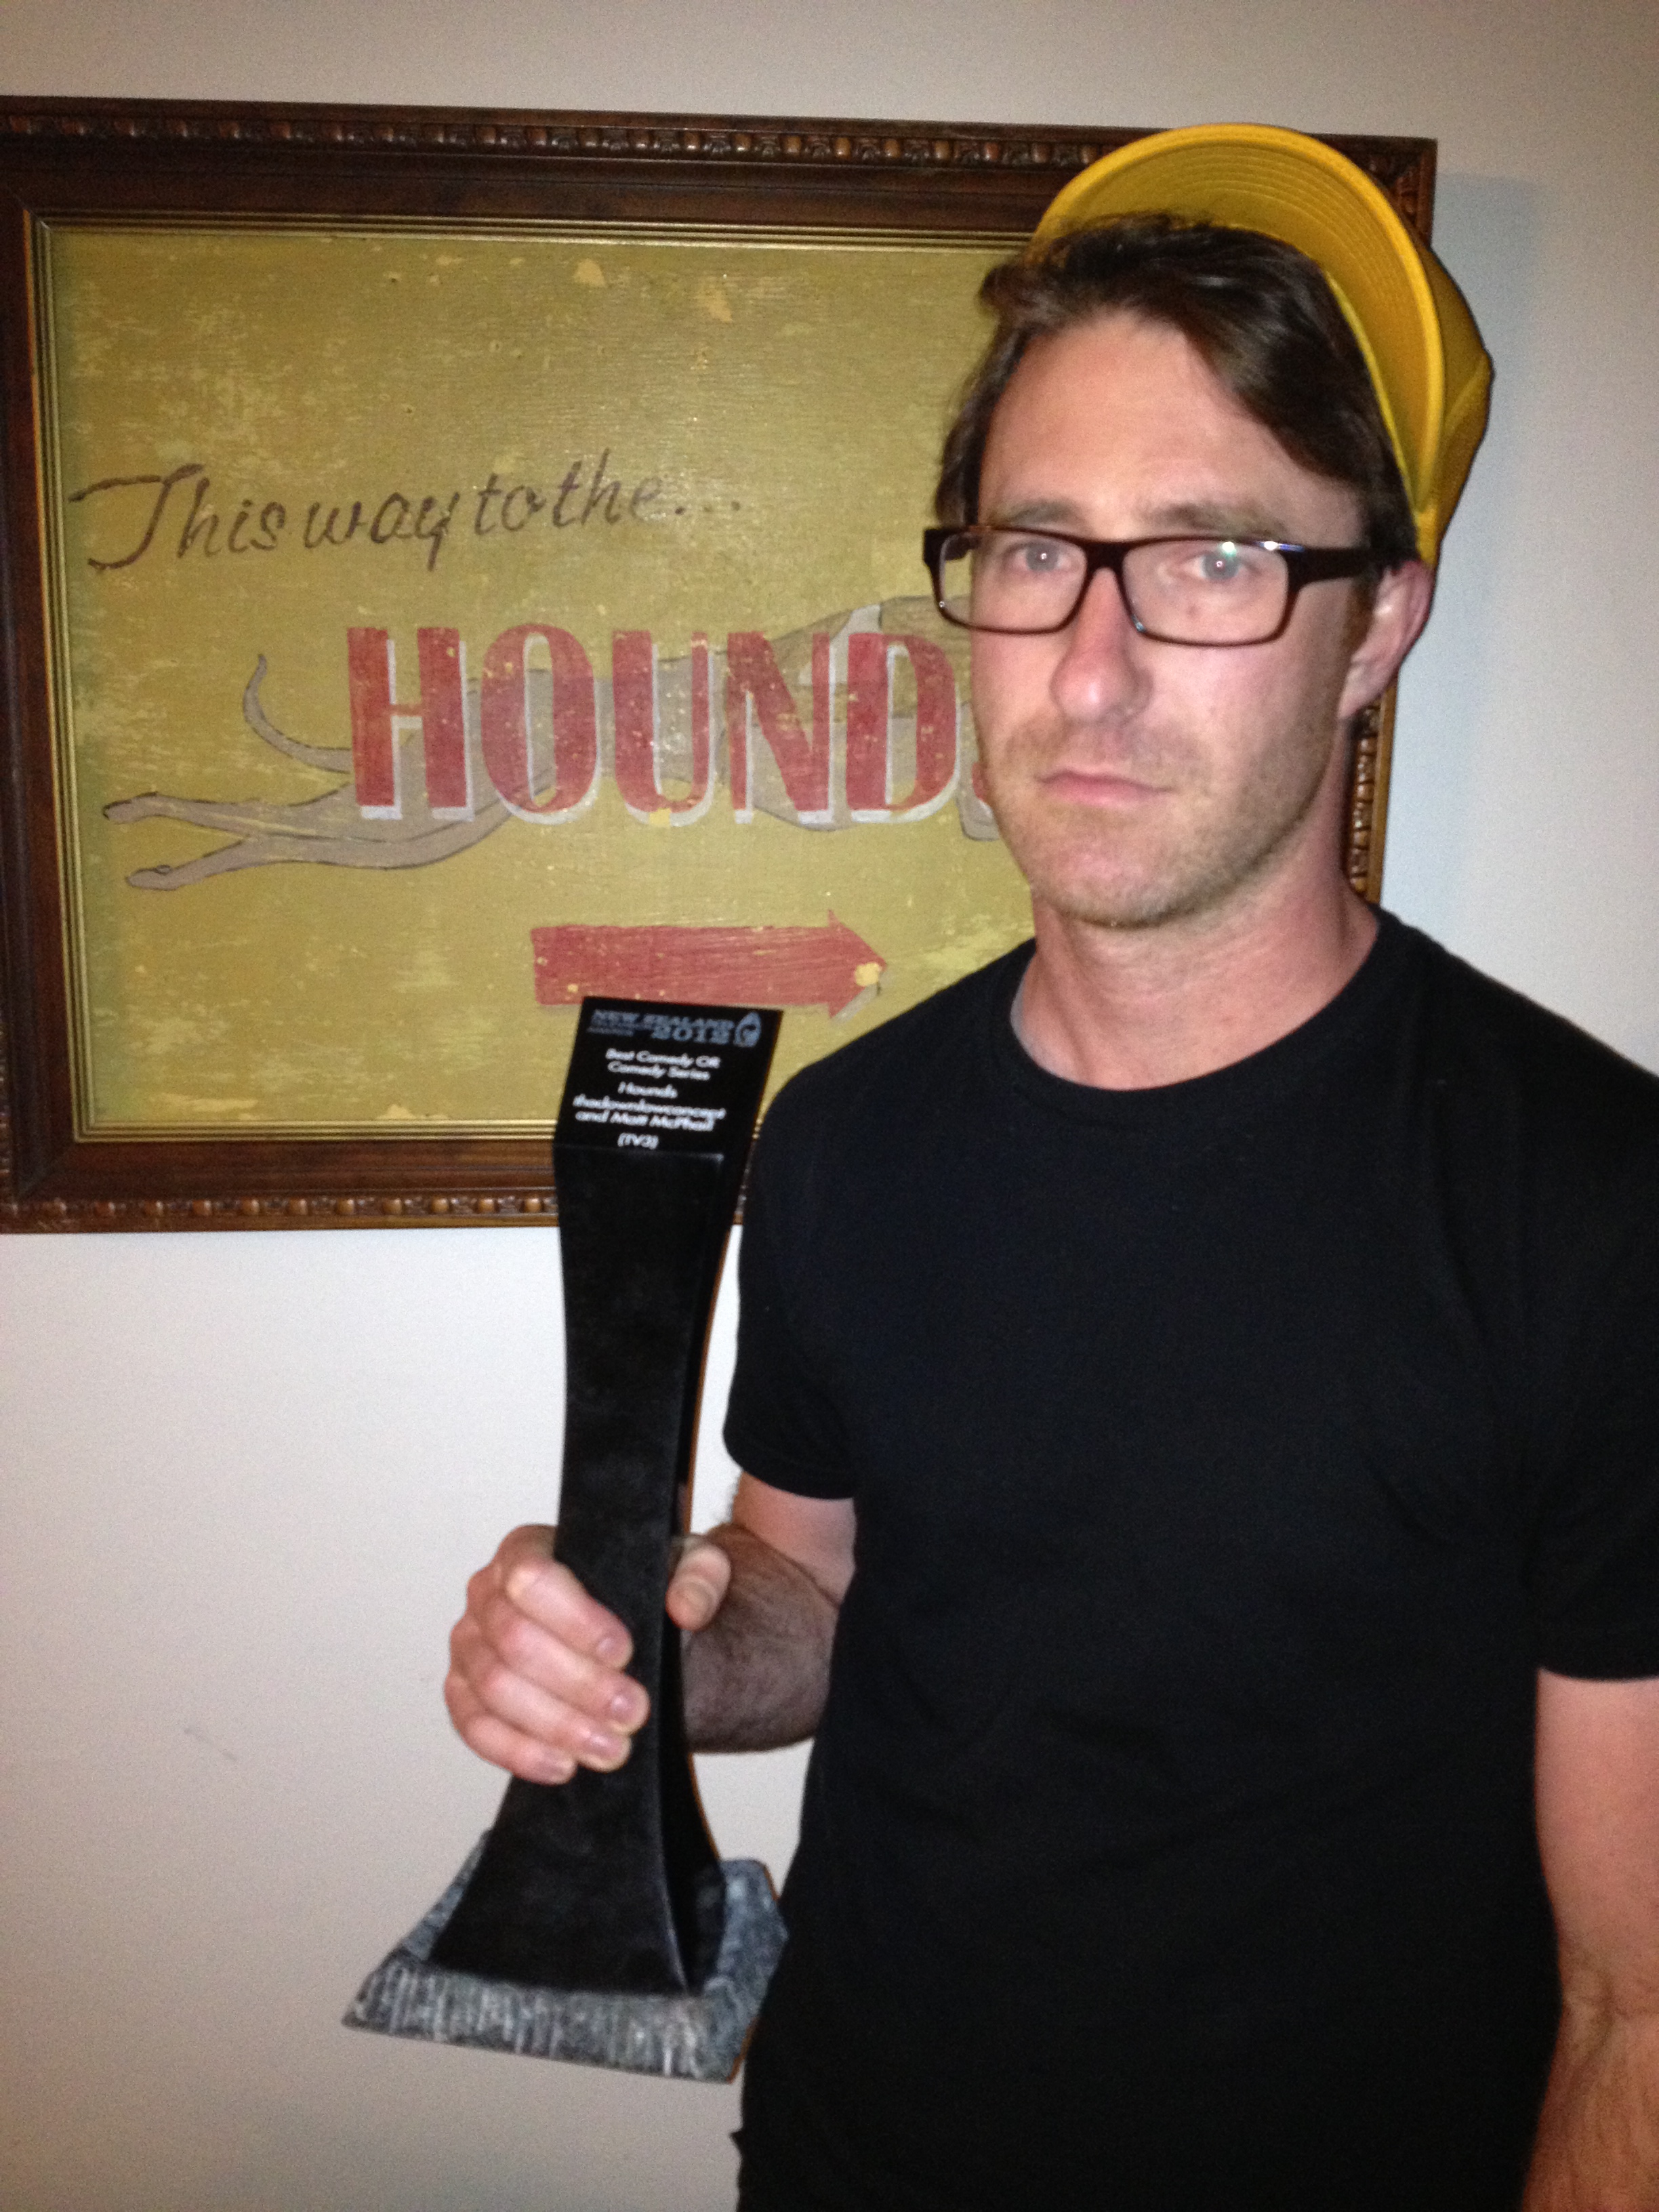 Pictured with the 'Best comedy' award for Hounds after the 2012 New Zealand television awards